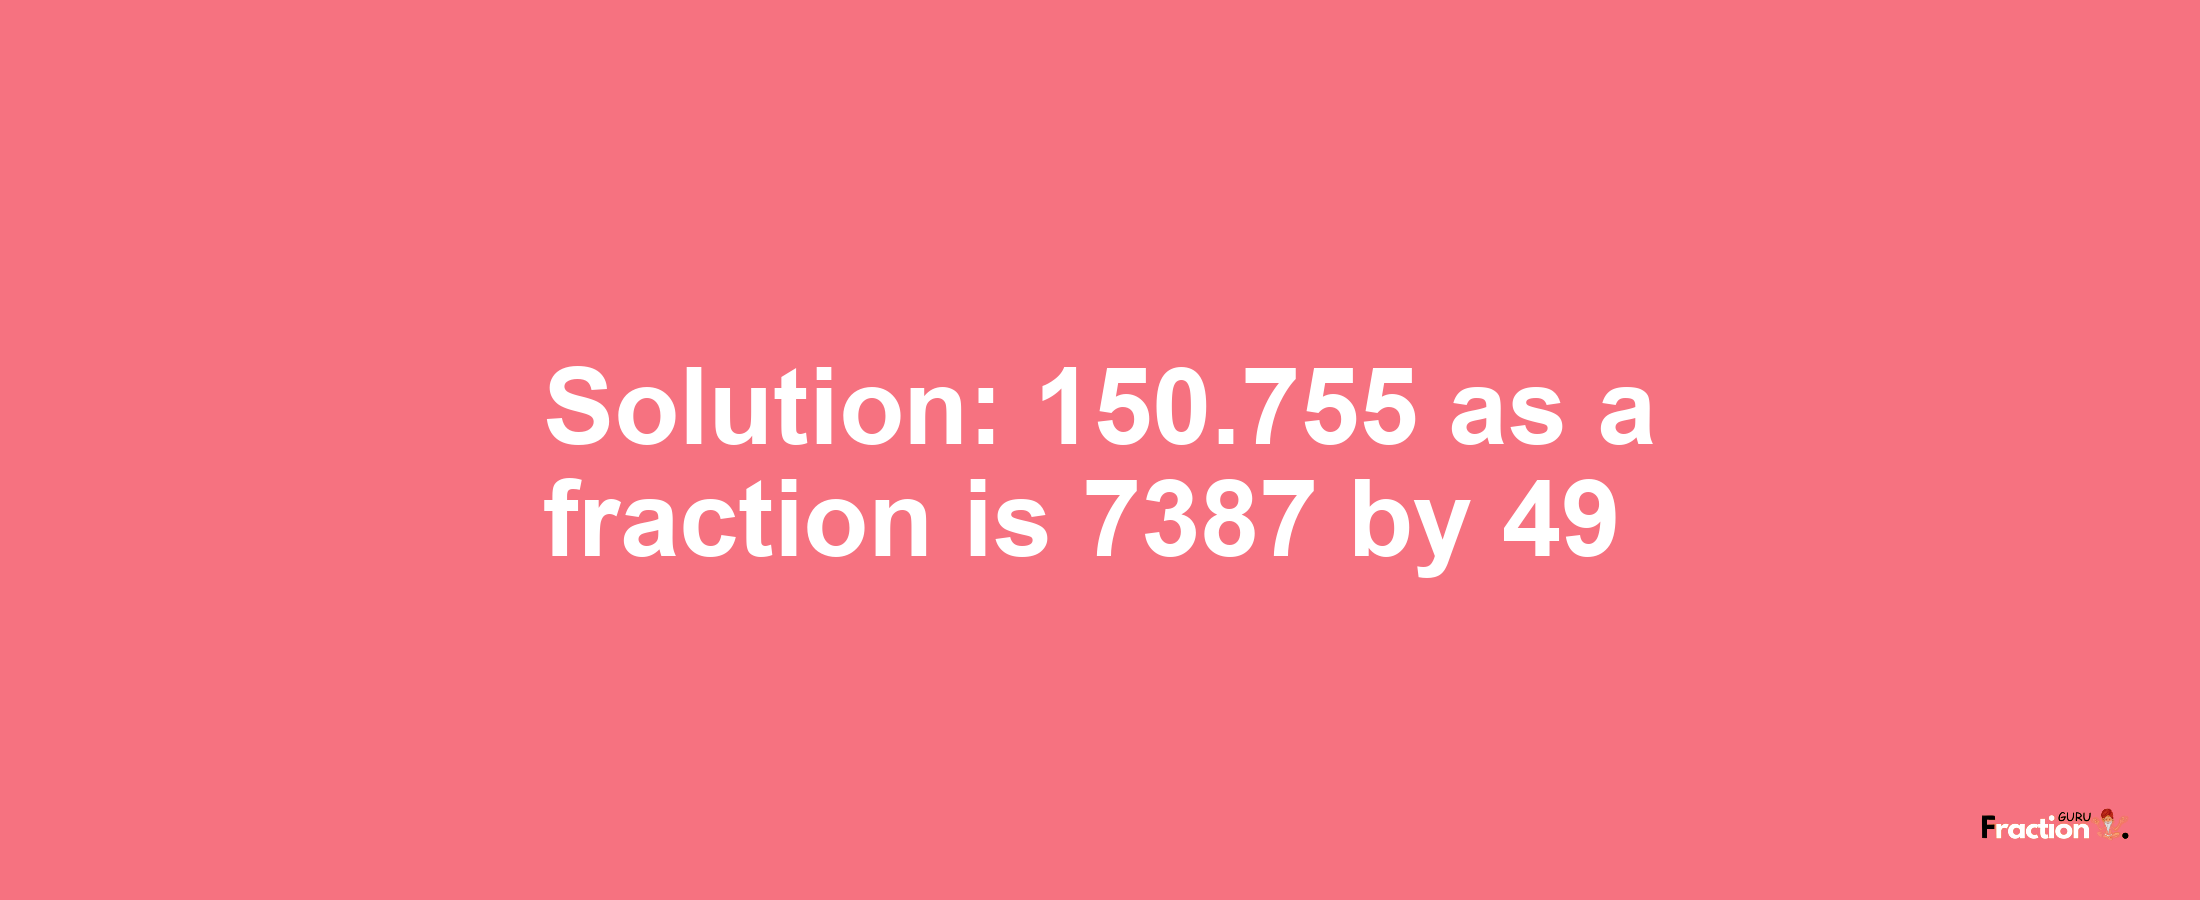 Solution:150.755 as a fraction is 7387/49